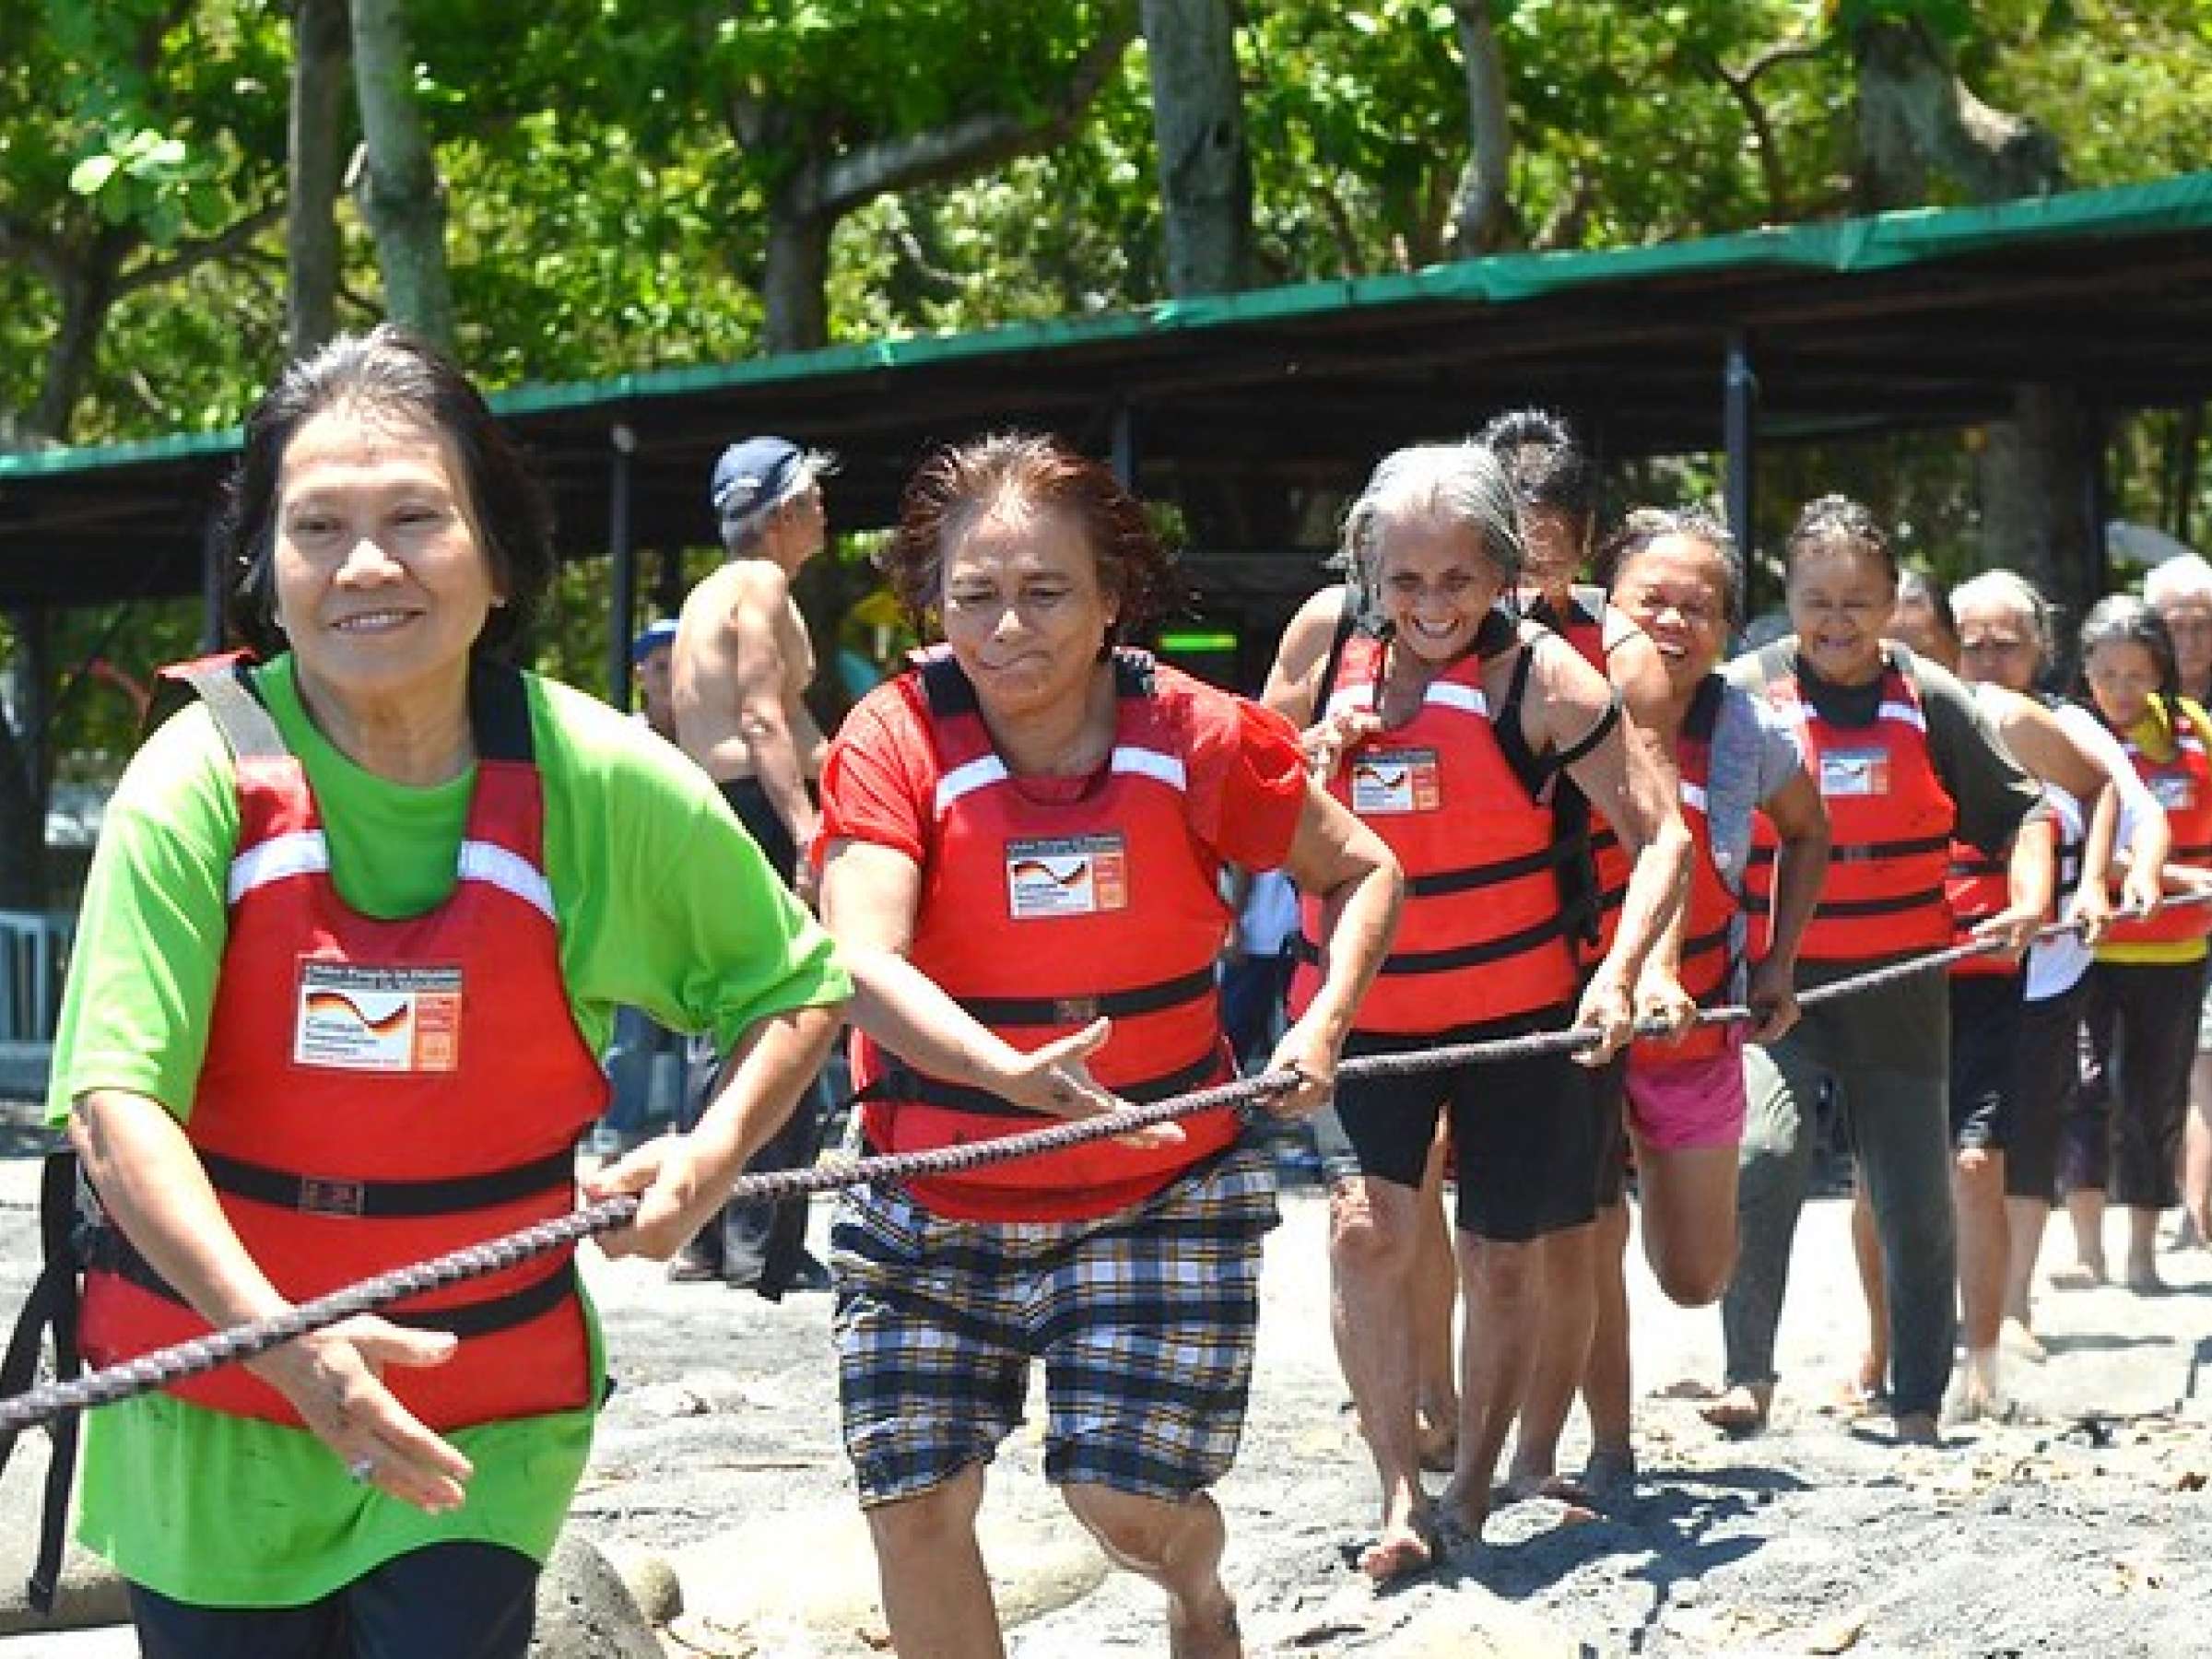 group of people wearing life vests run holding a rope and smiling